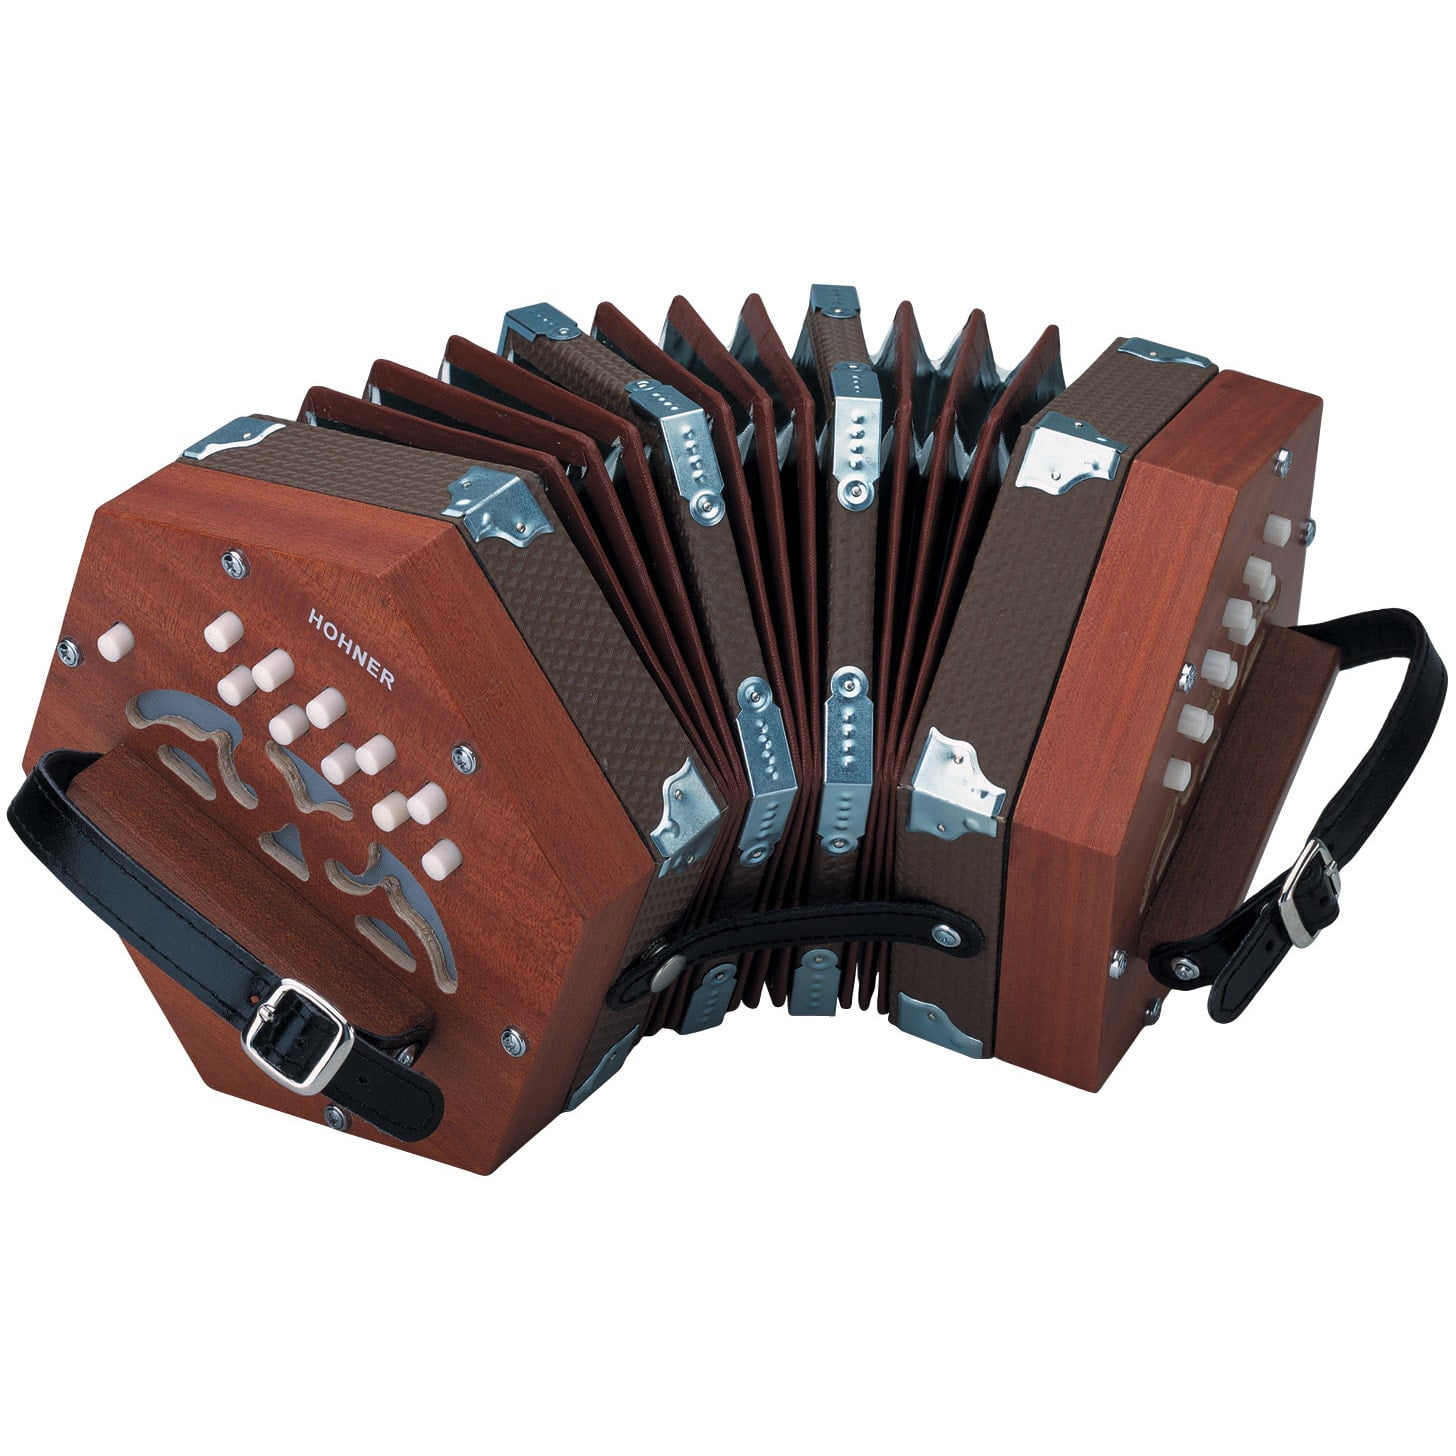 ammoon Concertina Accordion 20-Button 40-Reed Anglo Style with Carrying Bag